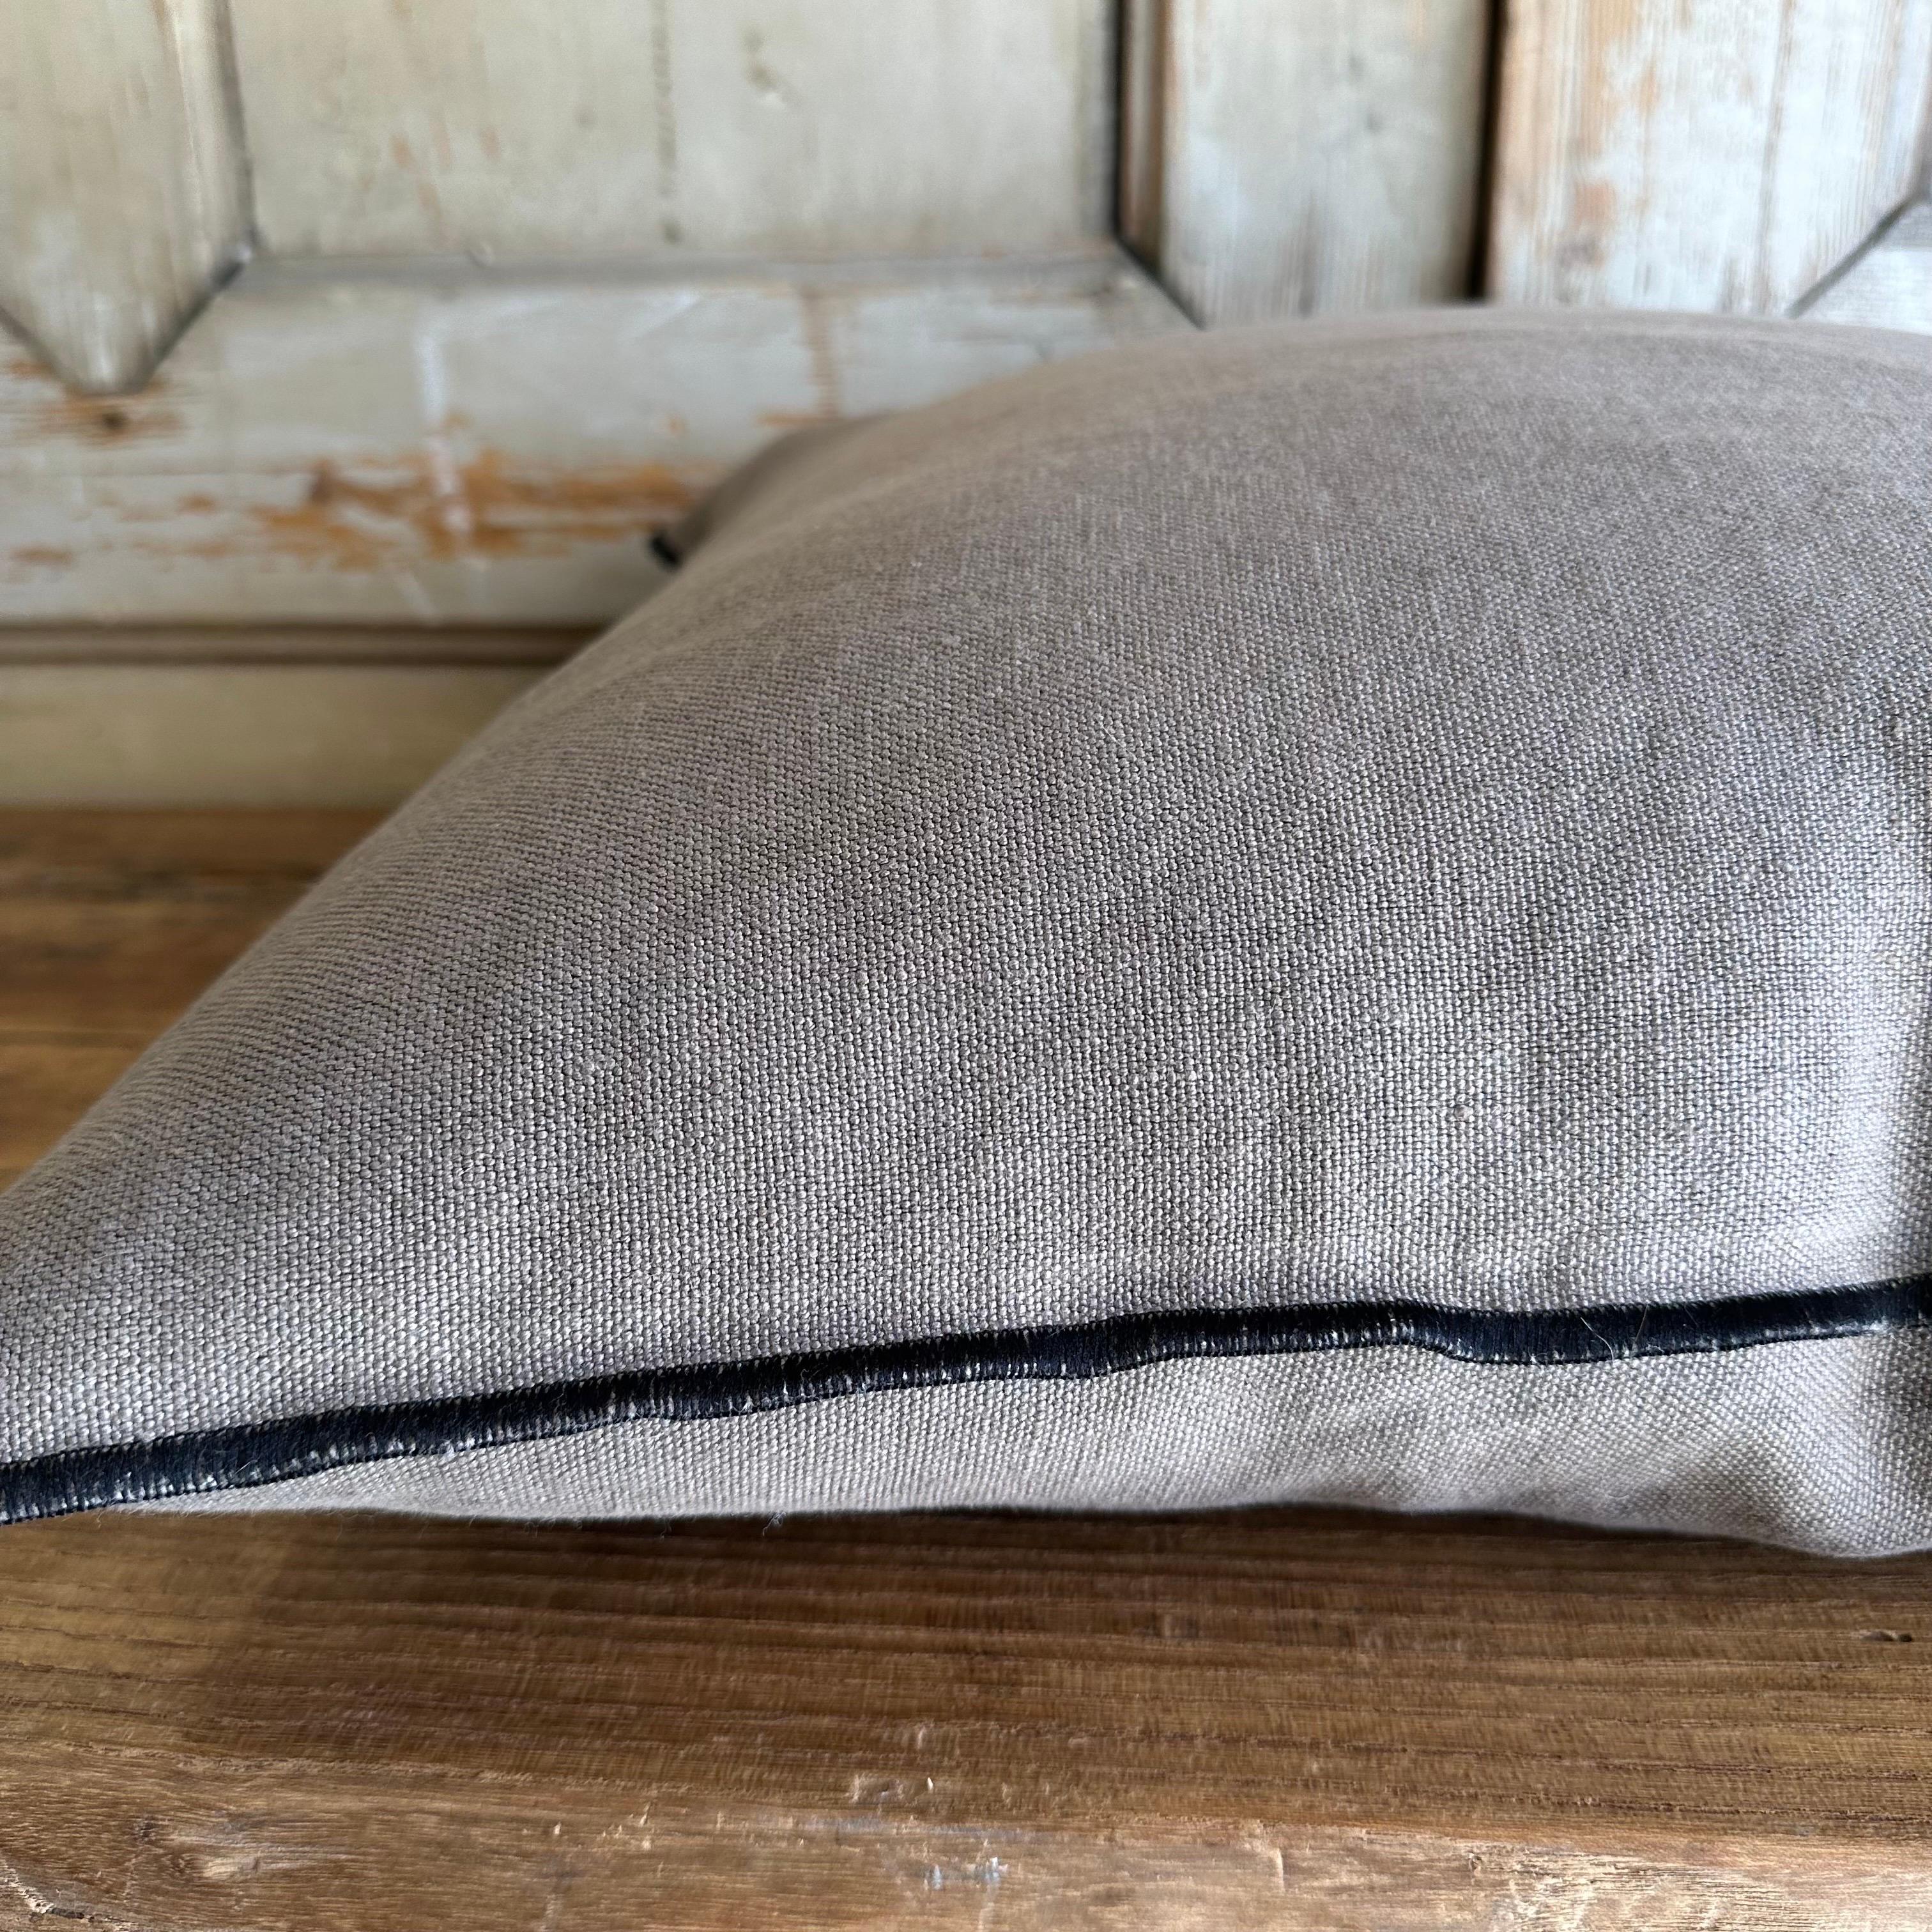 Stone Washed French Linen Accent Pillow in Ecorce For Sale 2